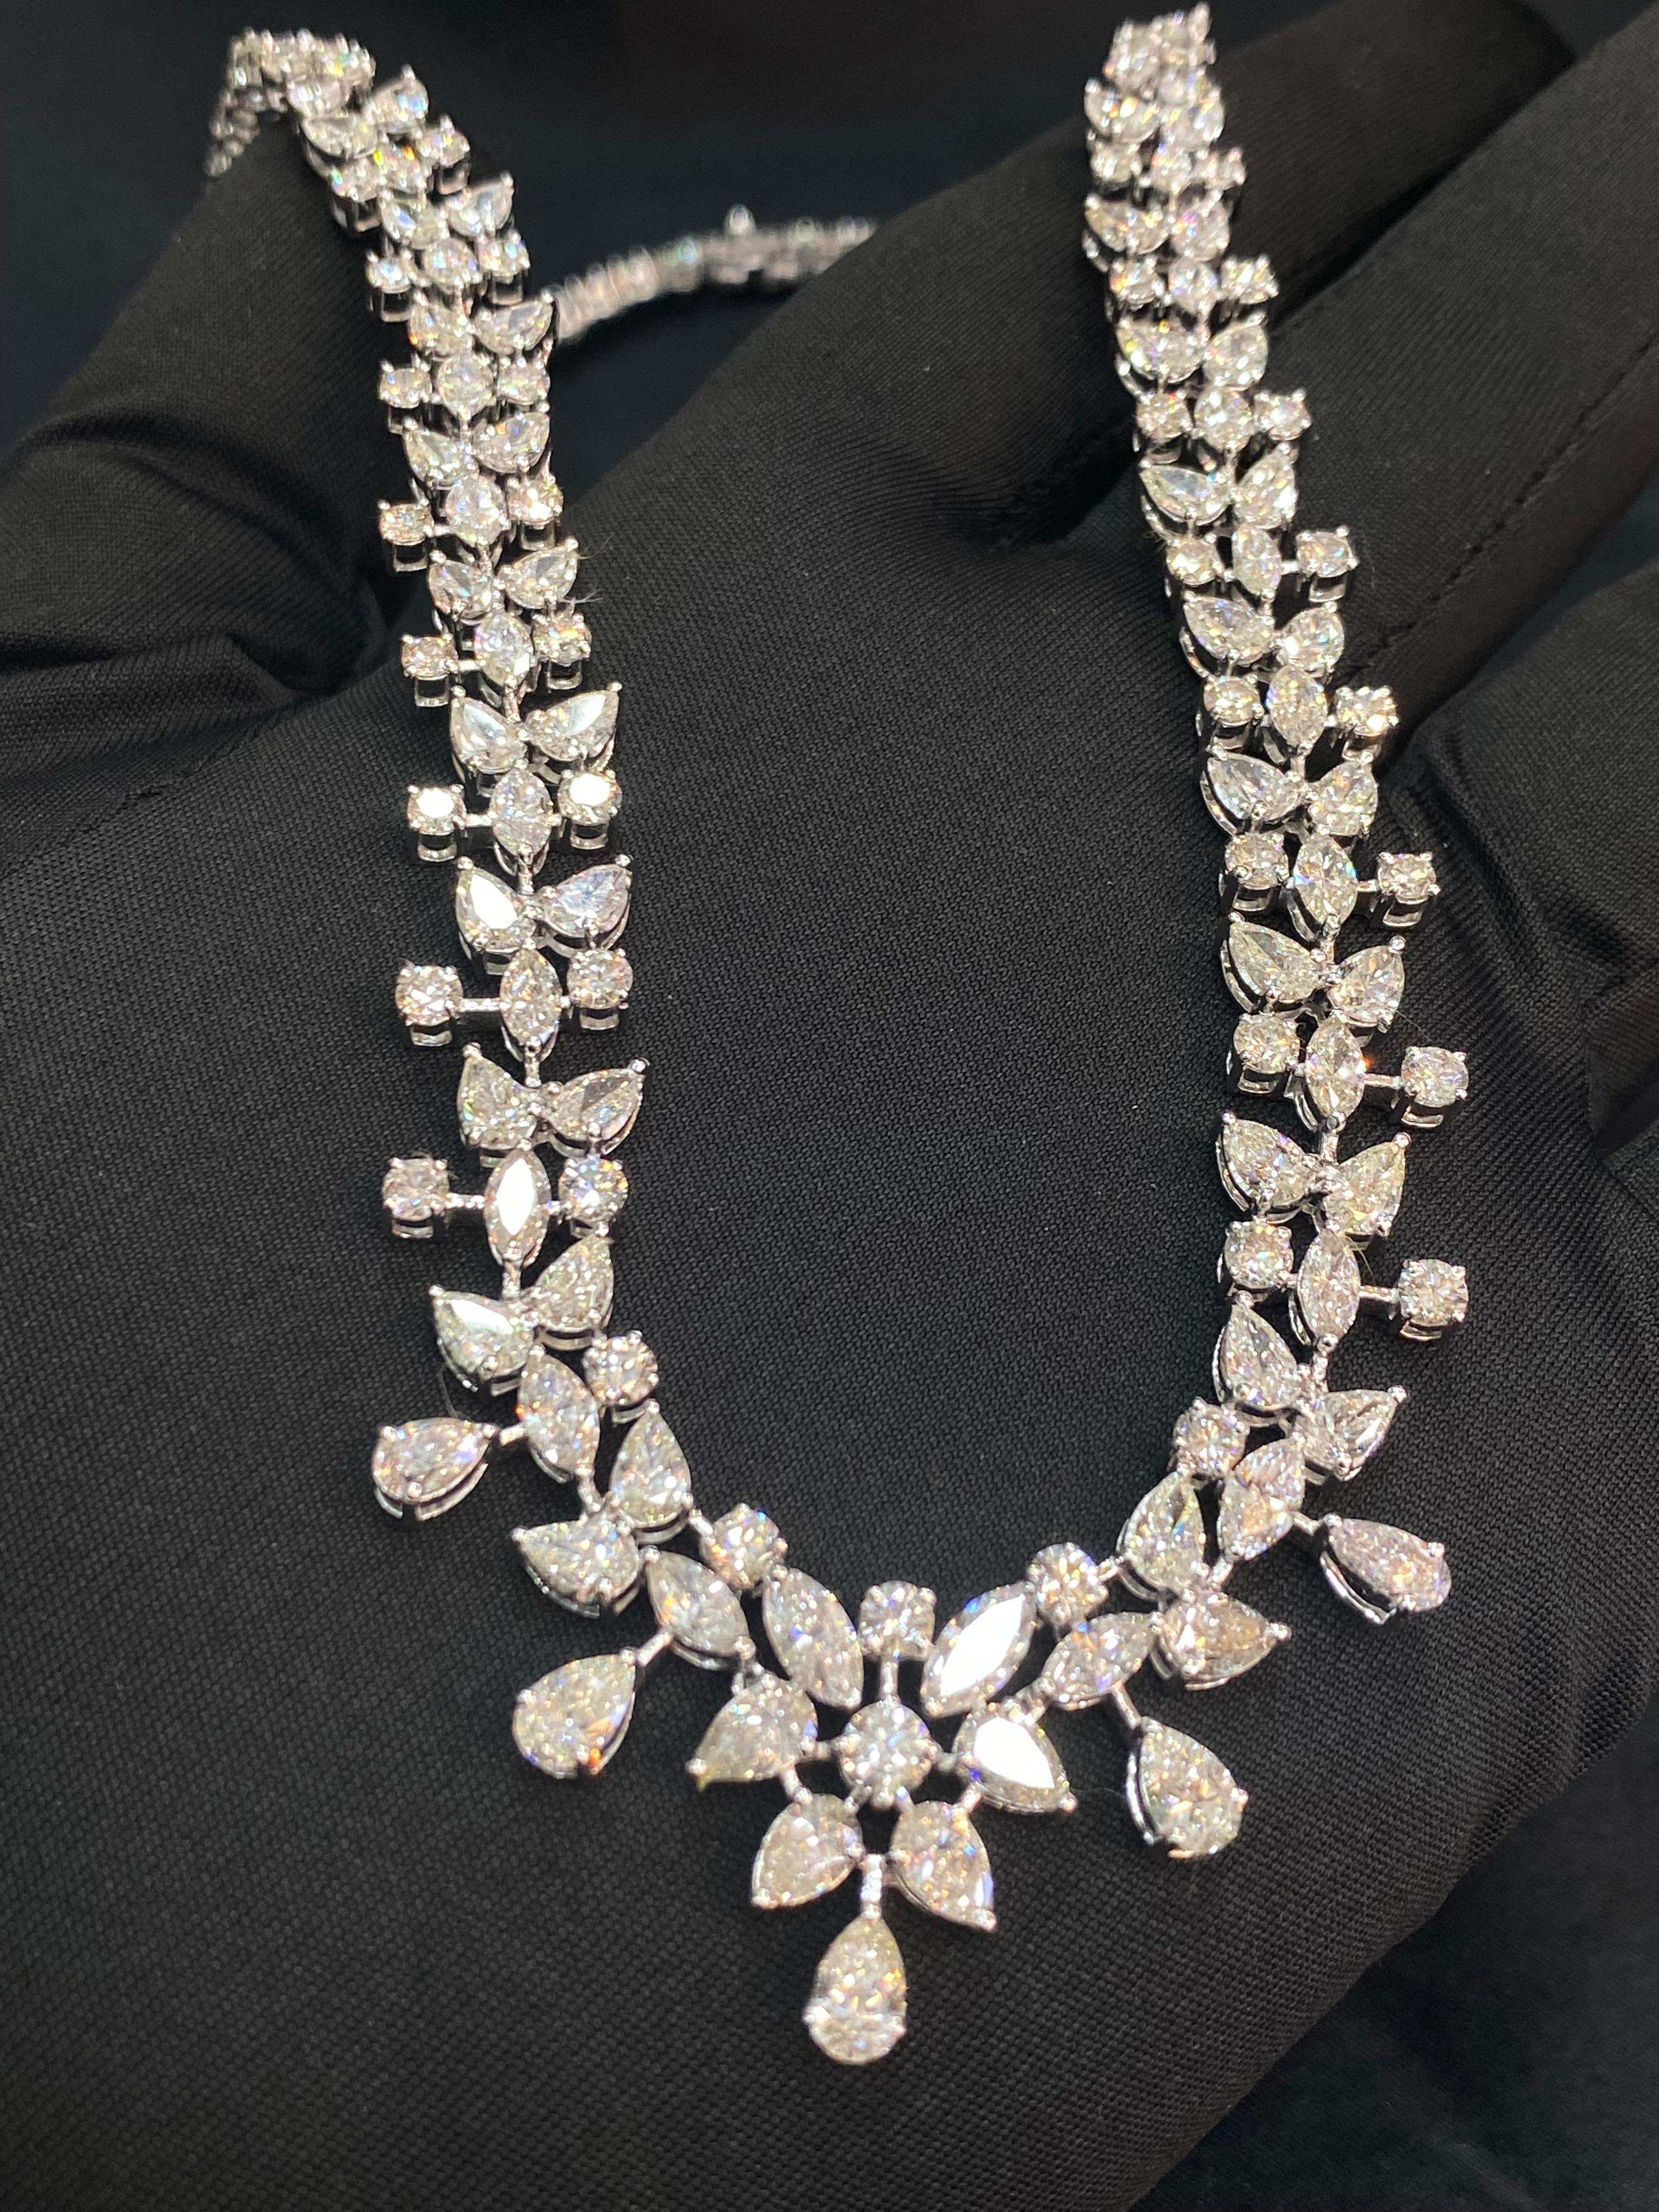 This exquisite necklace showcases 27.76 carats of marquise, pear, and round shape natural diamonds set in 18K white gold. Its captivating design makes it an ideal choice to dazzle on any wedding day, drawing attention with its elegance and